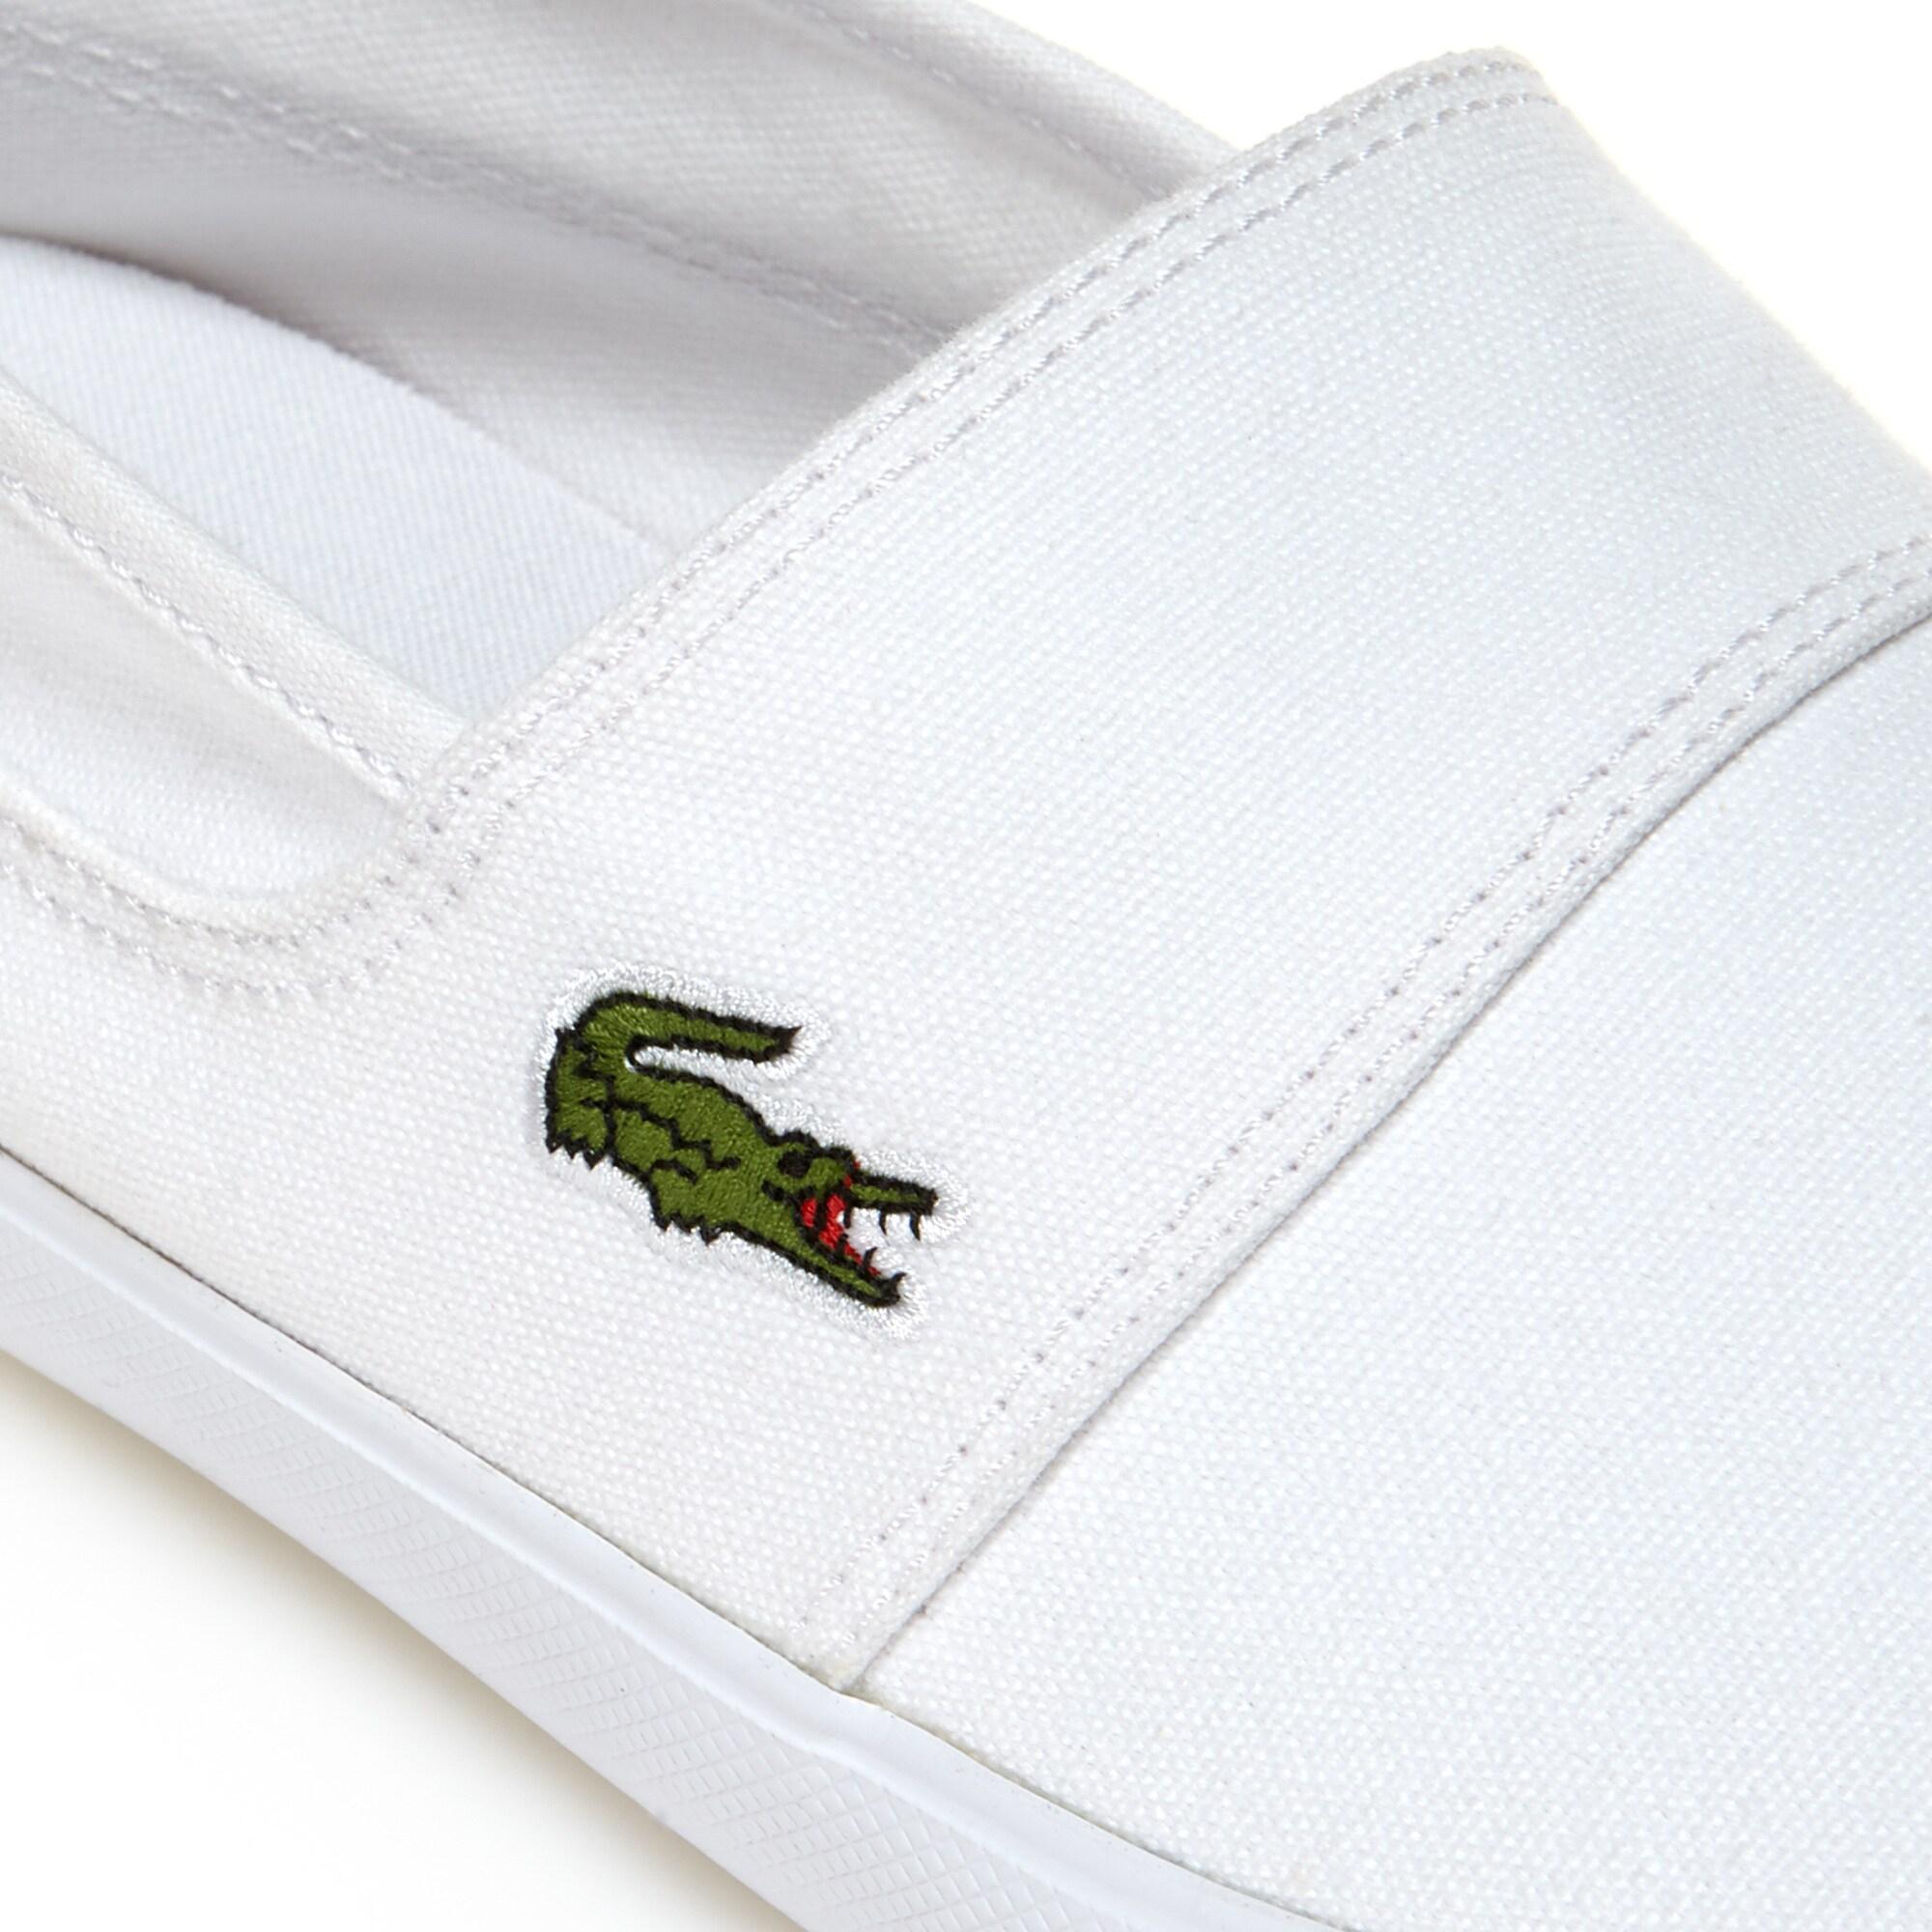 Lacoste Men's shoes slip-on Graduate from leather Premium